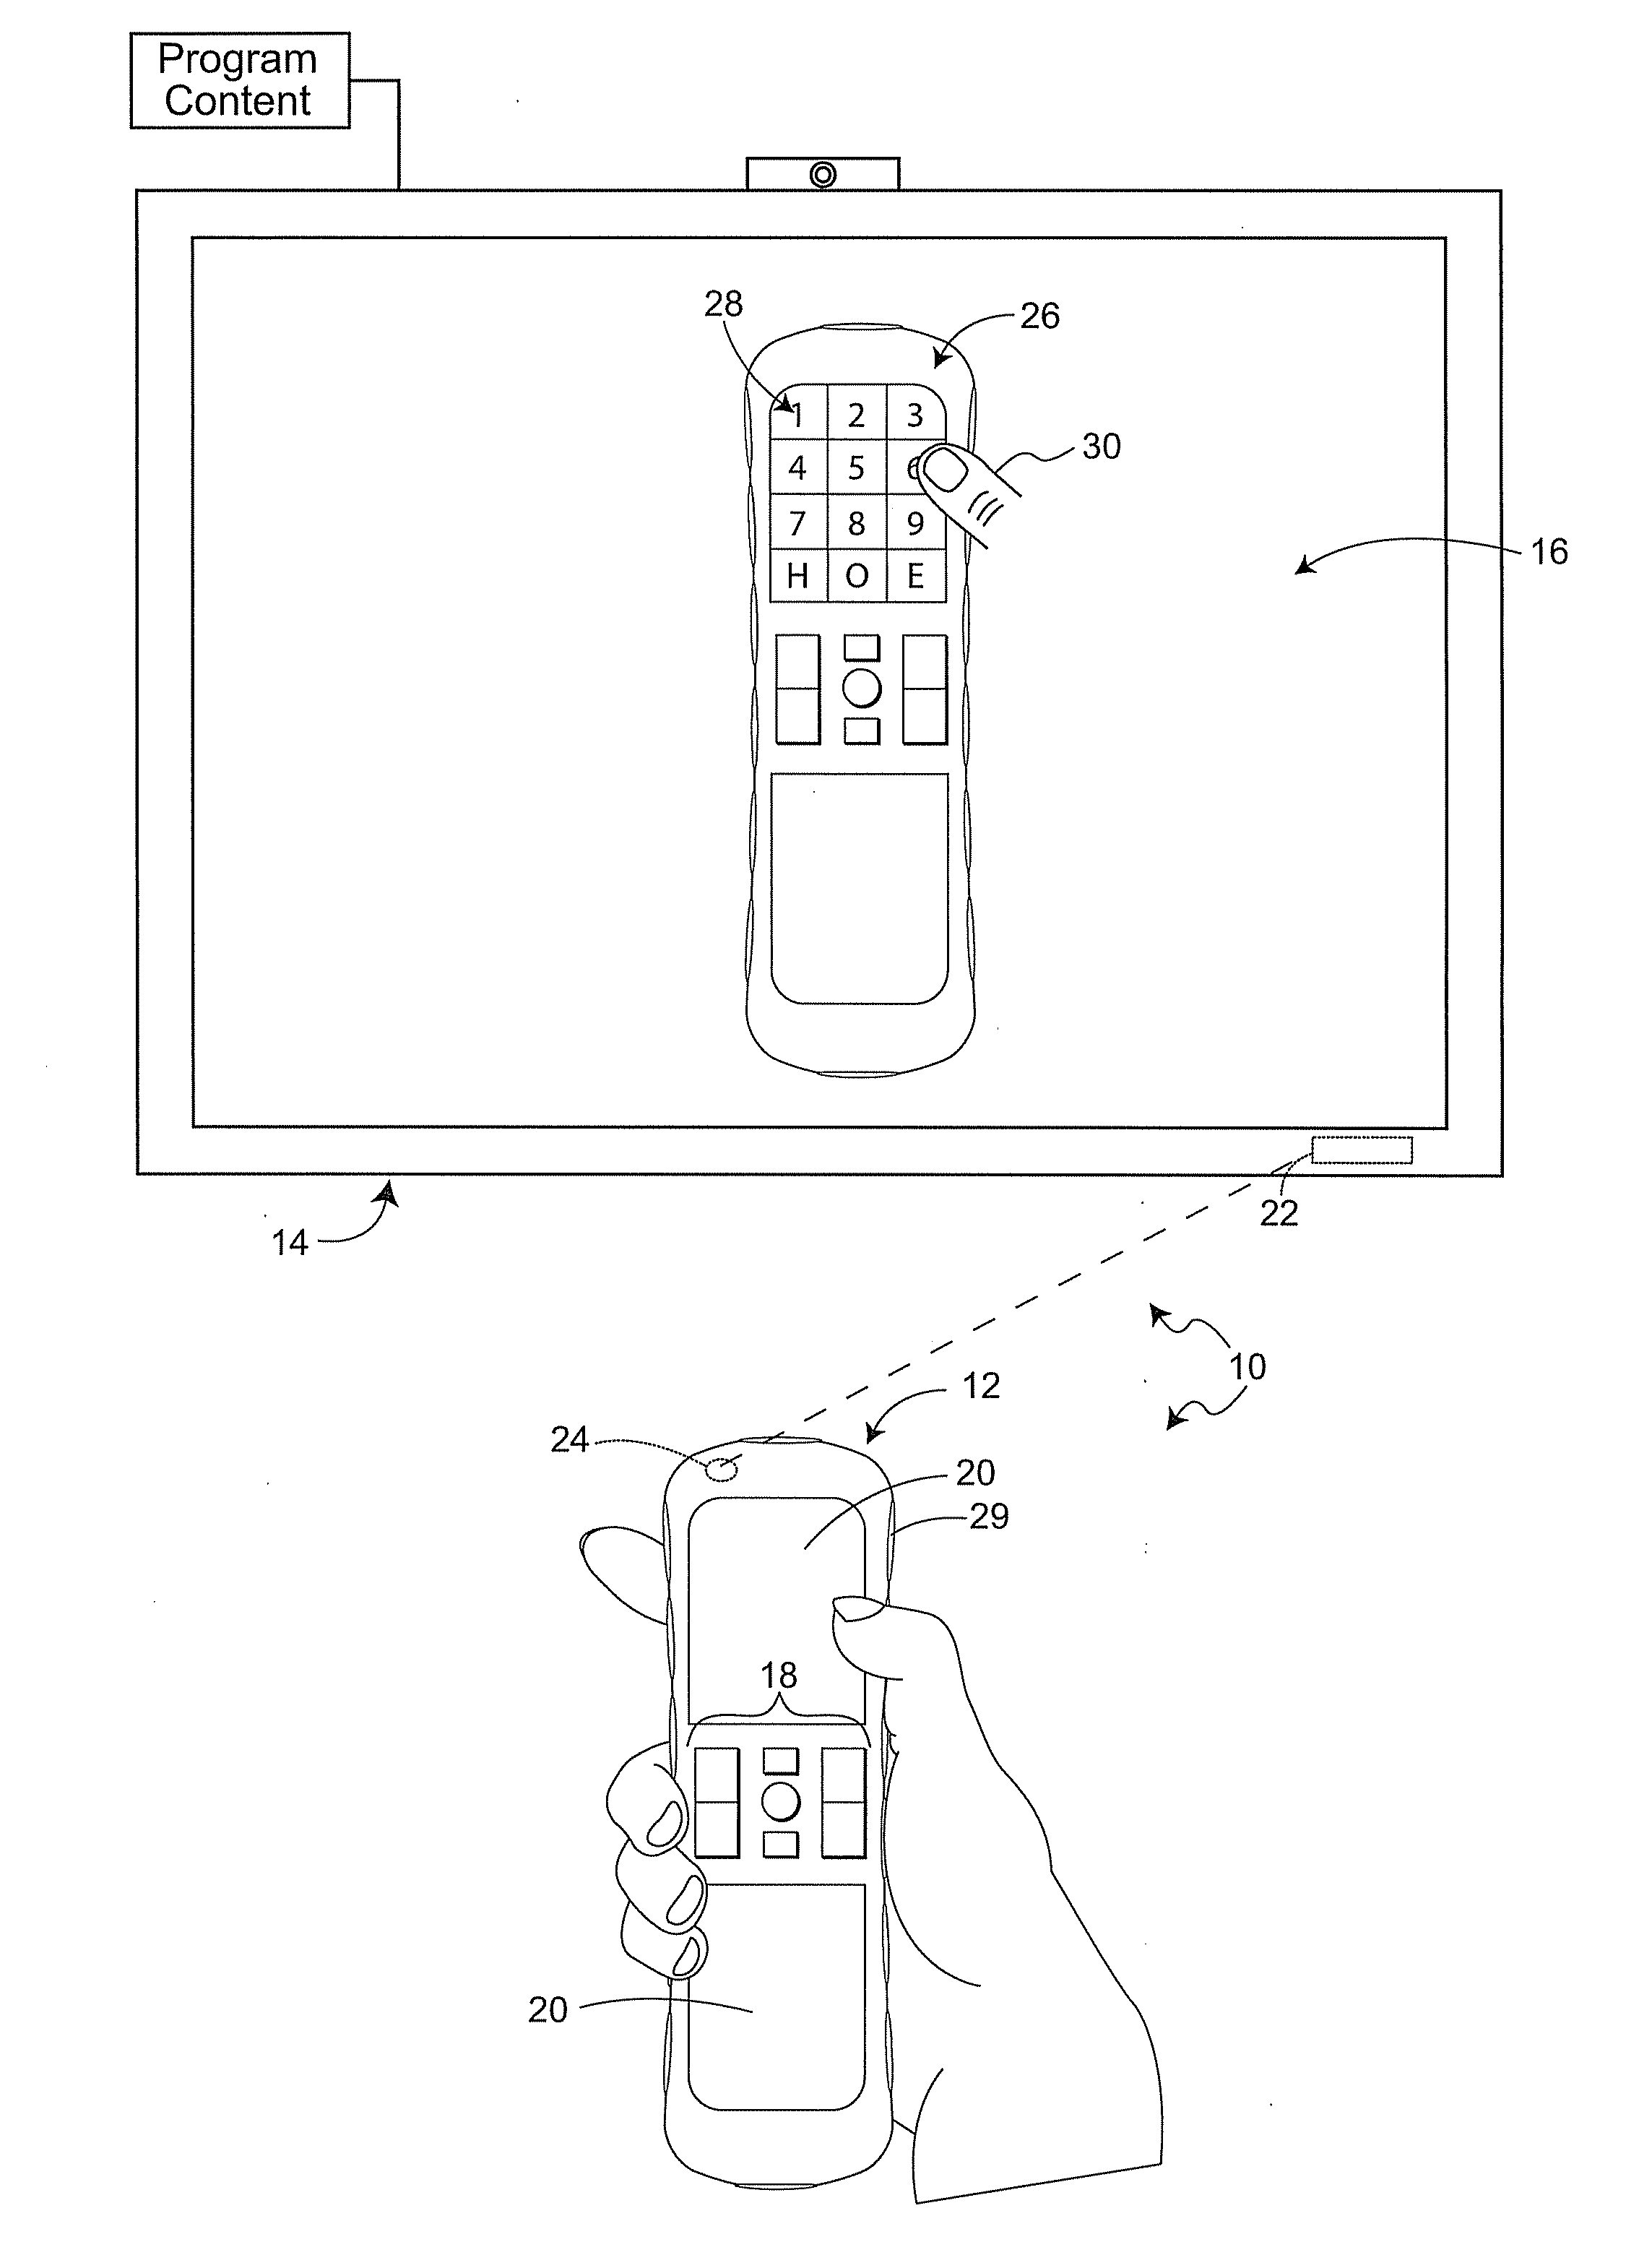 Method and system of identifying a user of a handheld device